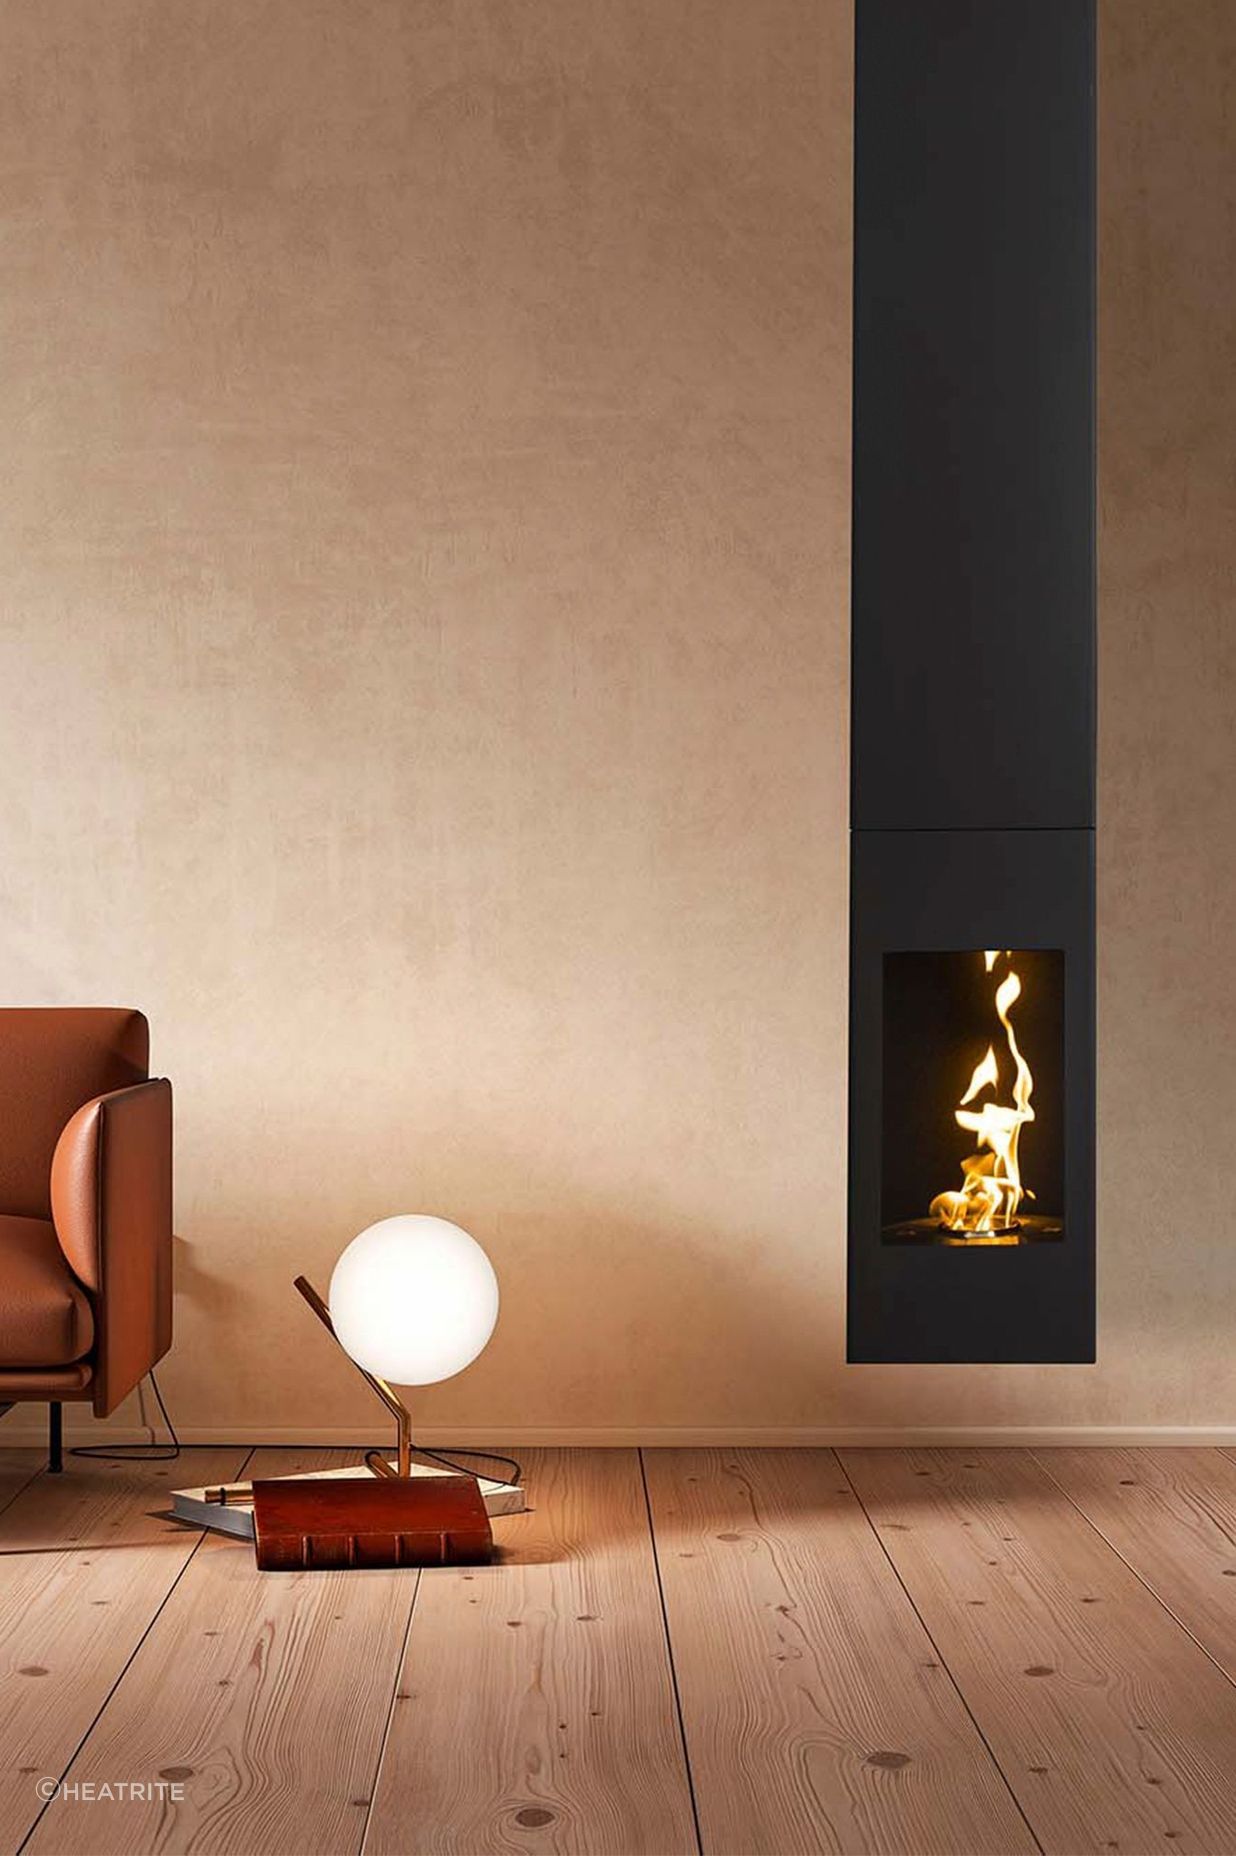 The Aurora 'Evolve' suspended fireplace carries the minimality of the interior's aesthetic